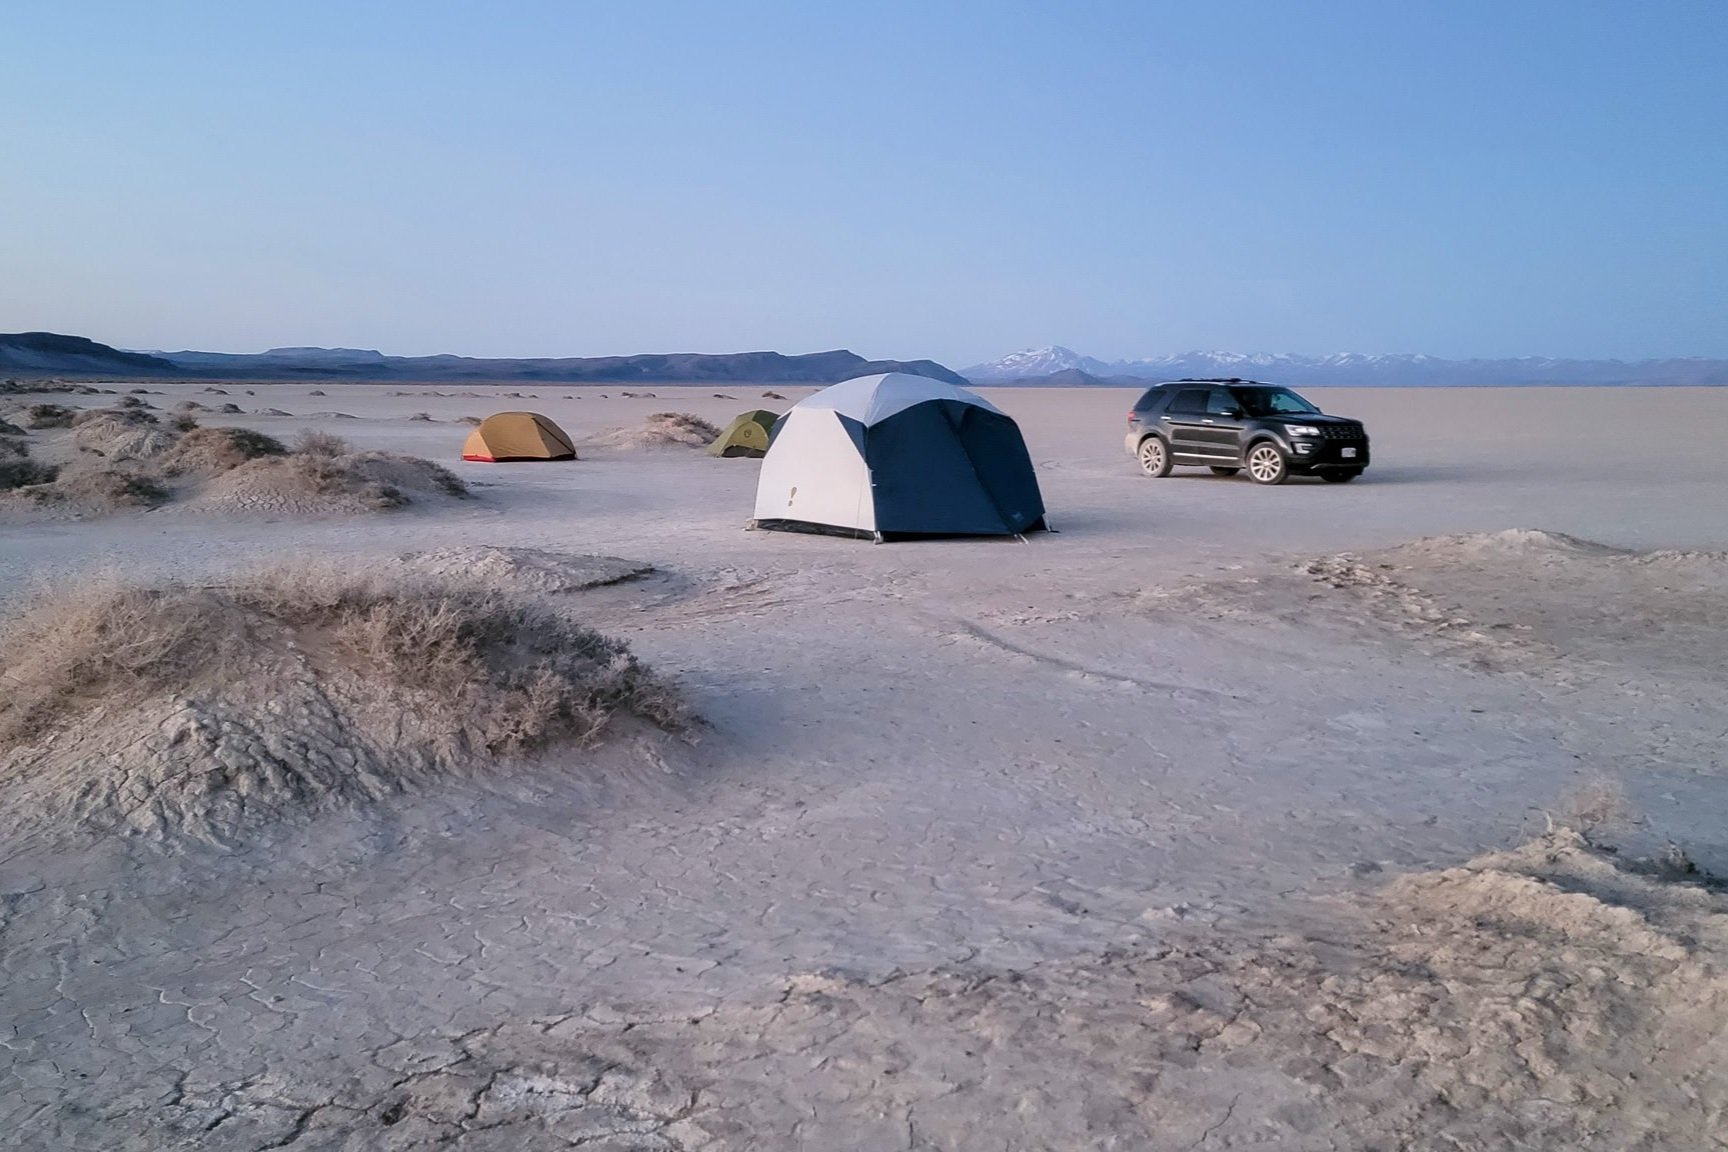 Camping and backpacking tents in the Alvord Desert